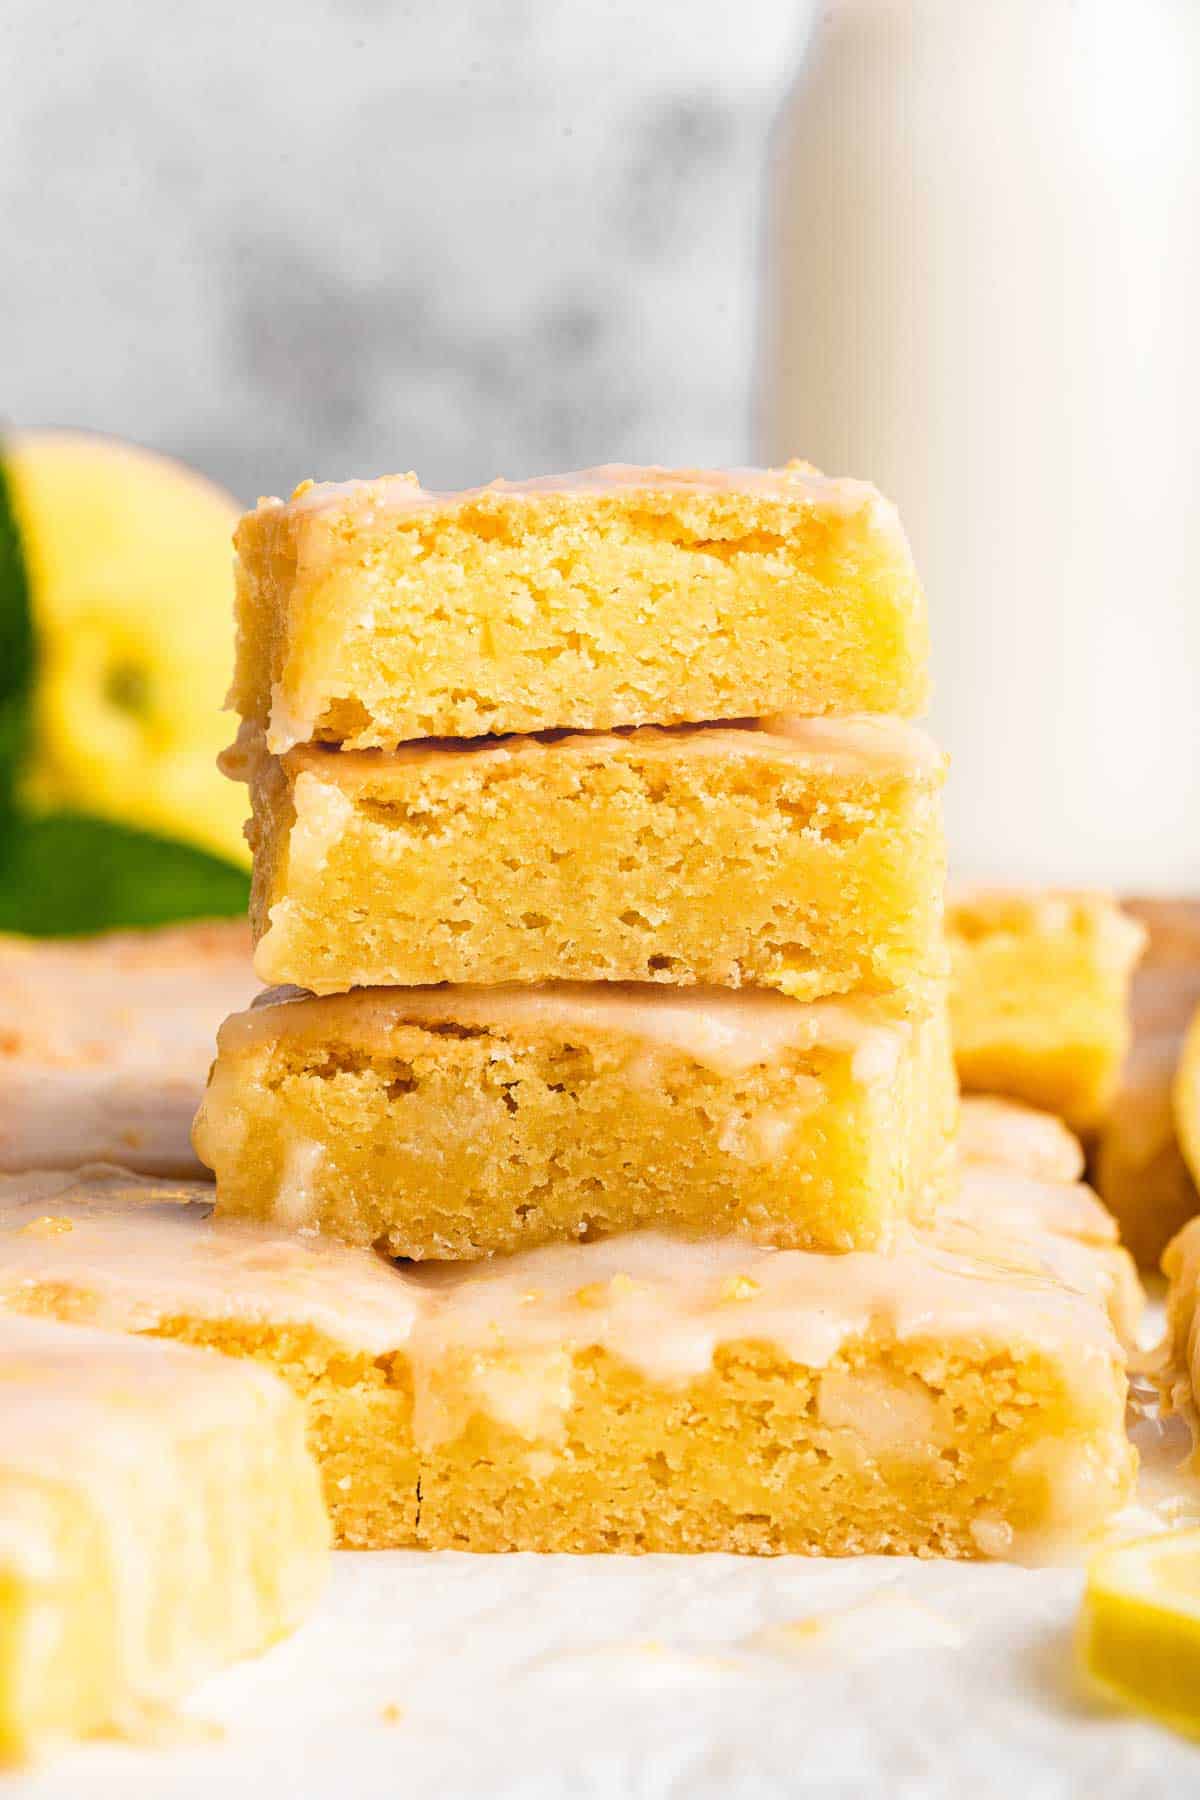 Three stacked lemon brownies on a grey surface.